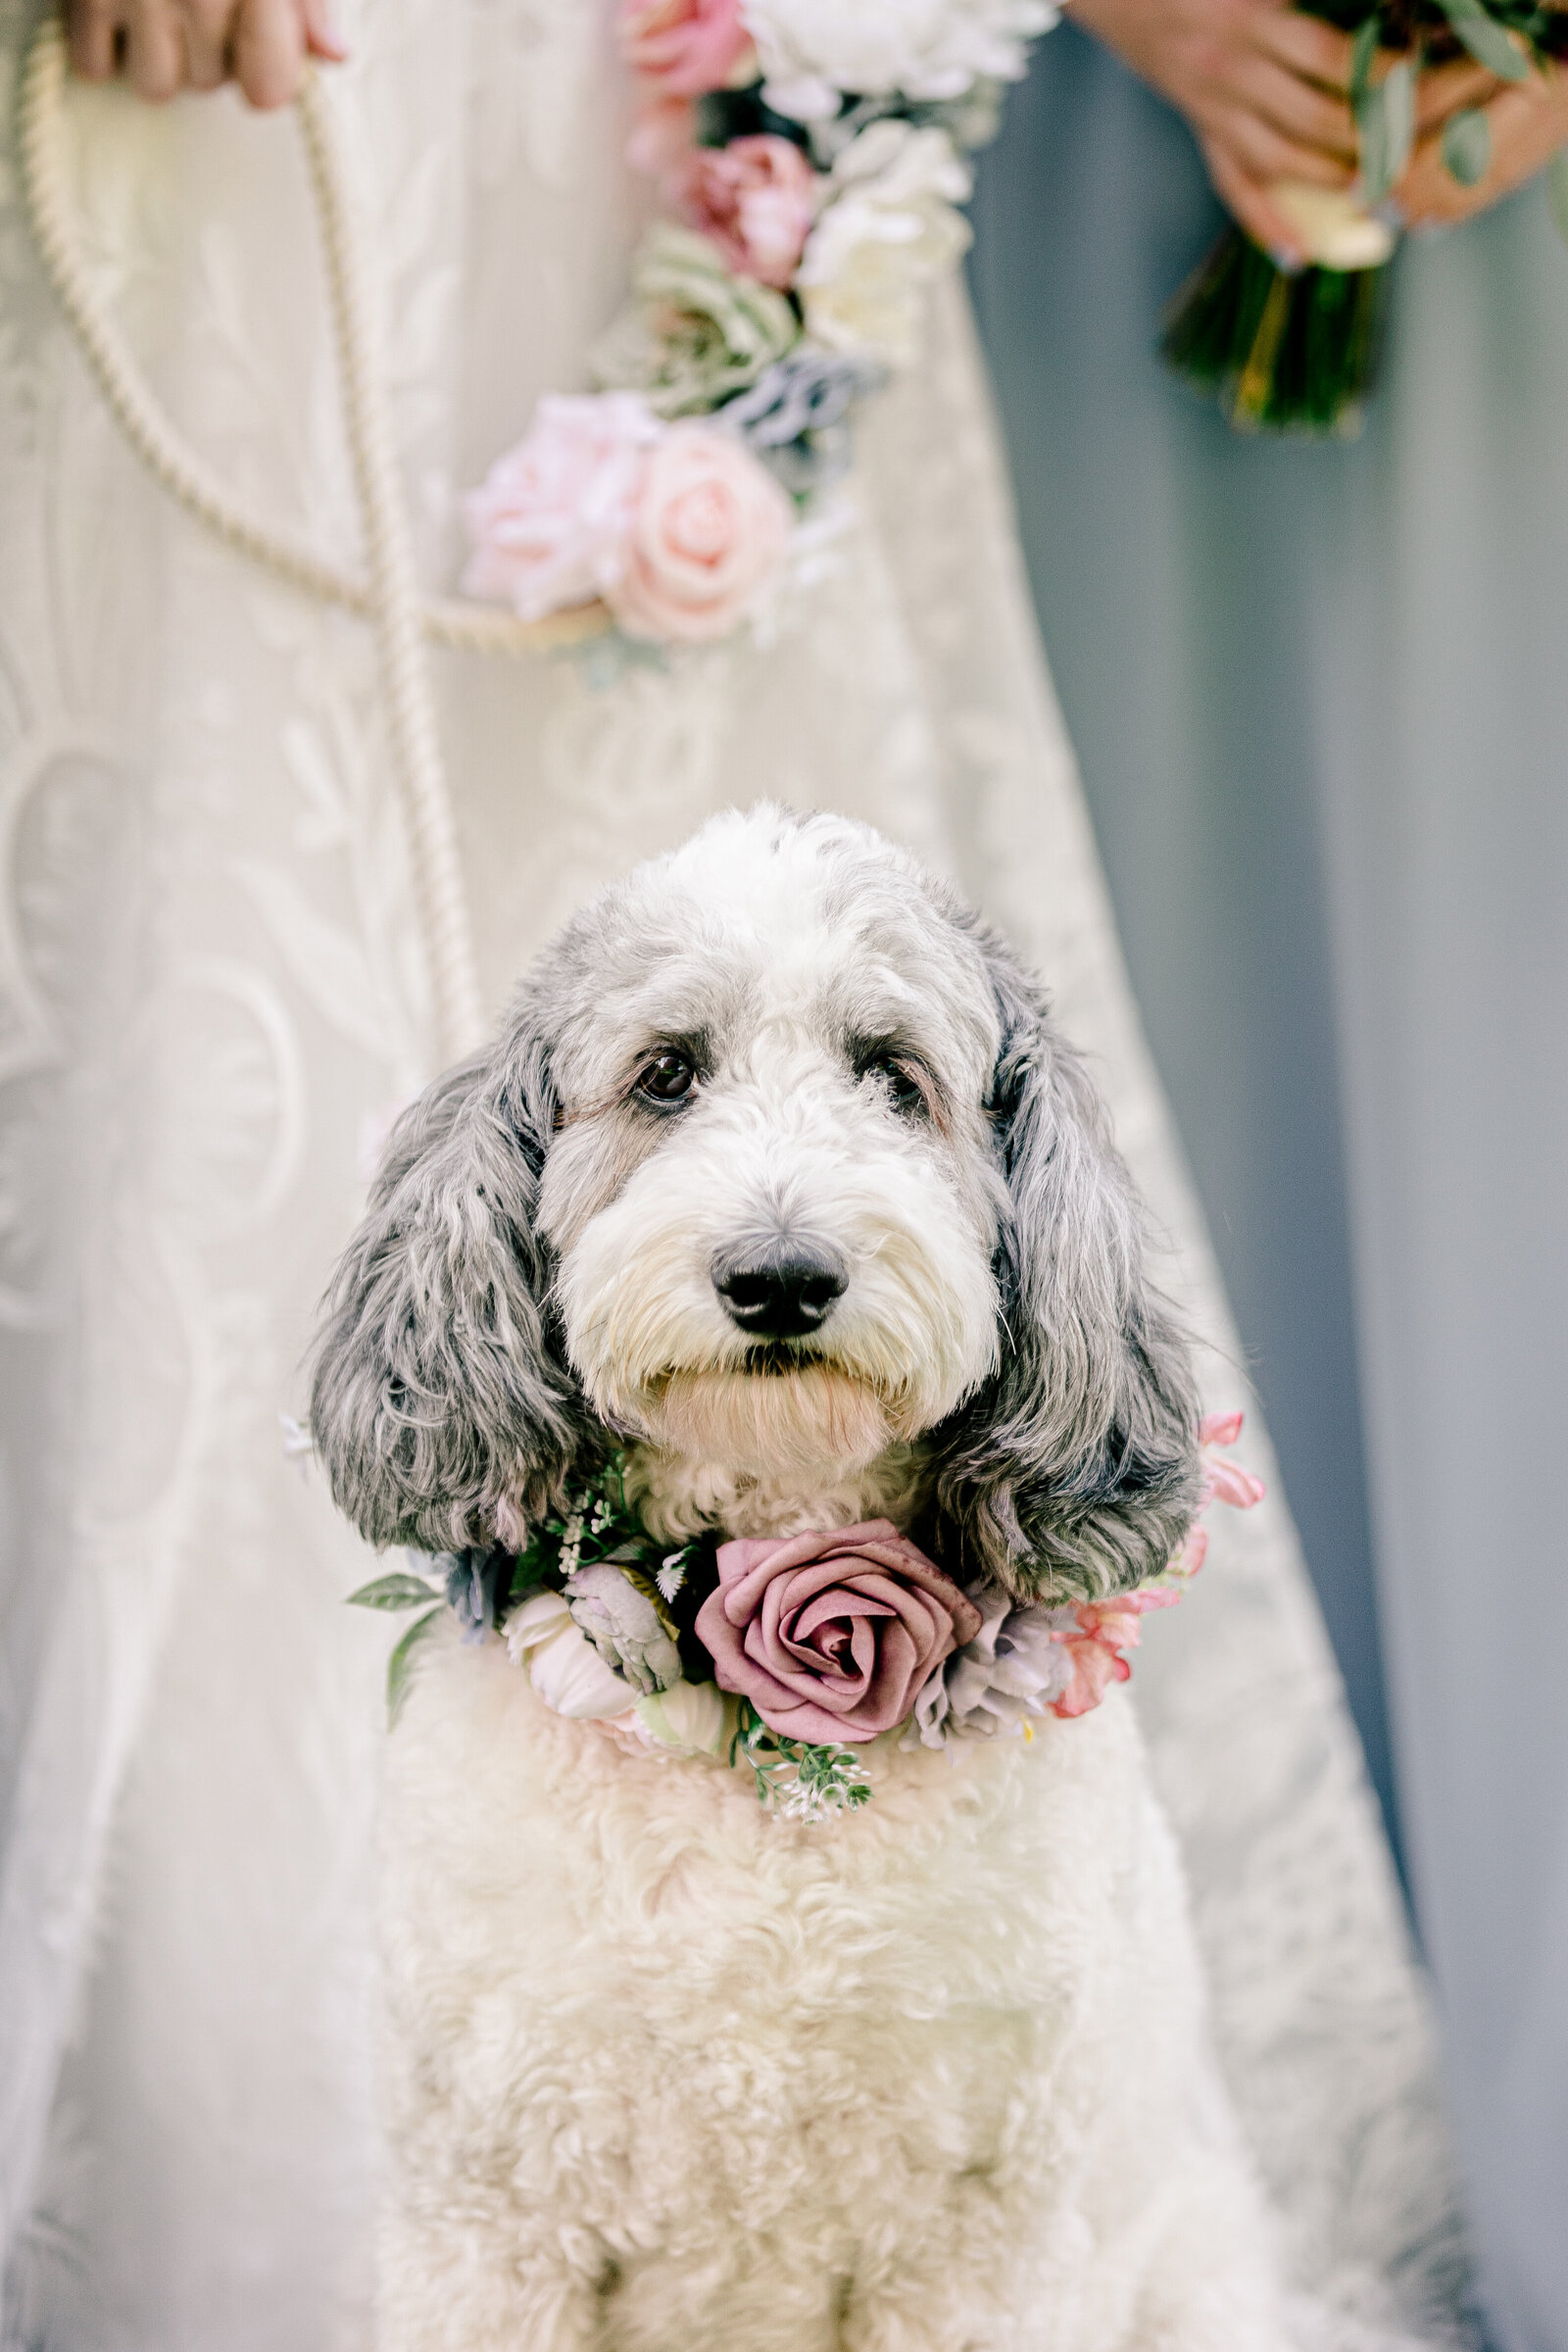 A close up portrait of the flower dog at a wedding at Blue Hill Farm in Loudoun County Virginia